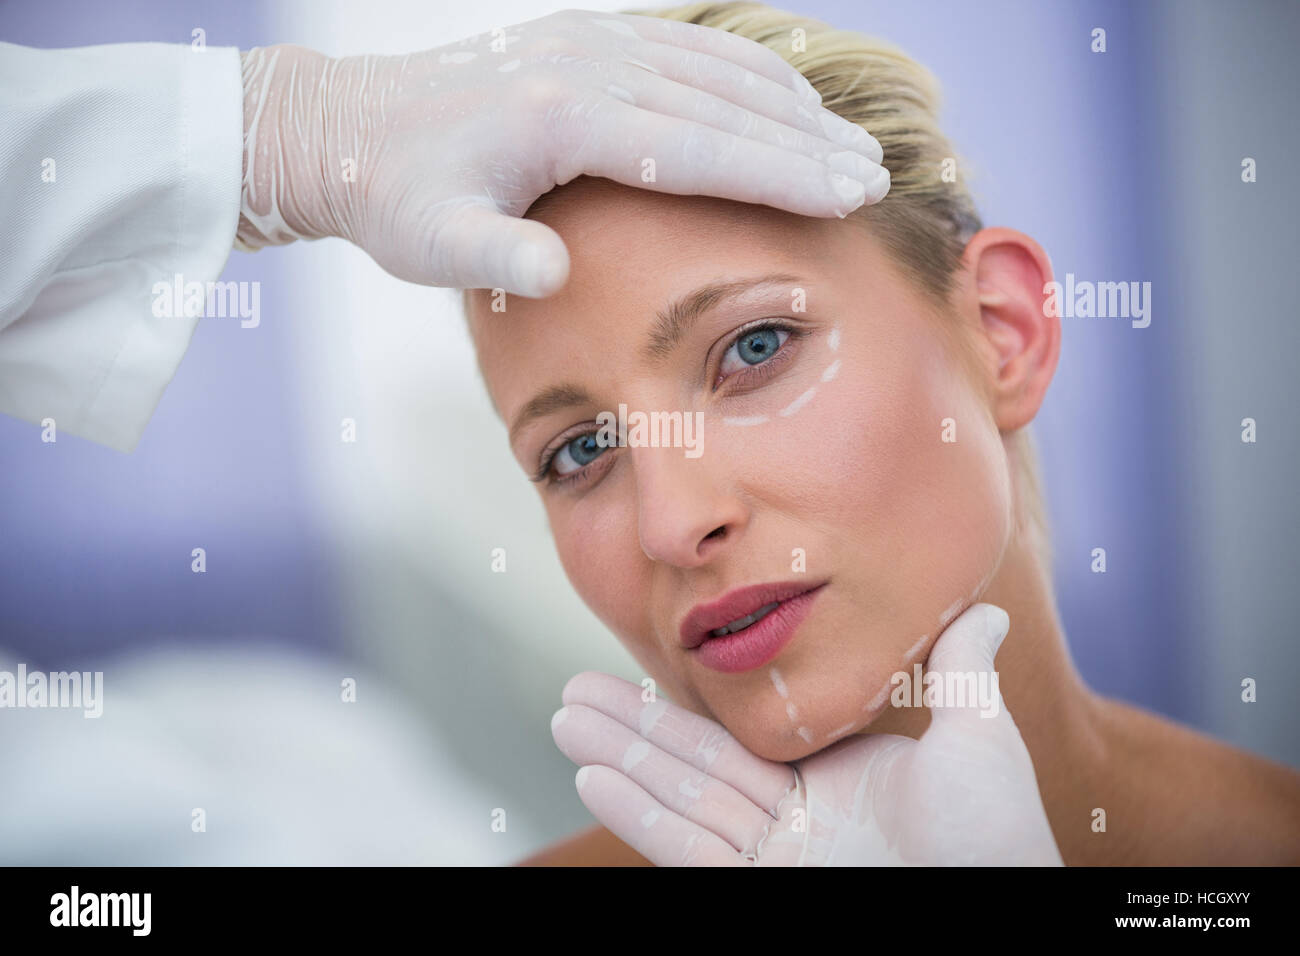 Doctor examining female patients face for cosmetic treatment Stock Photo